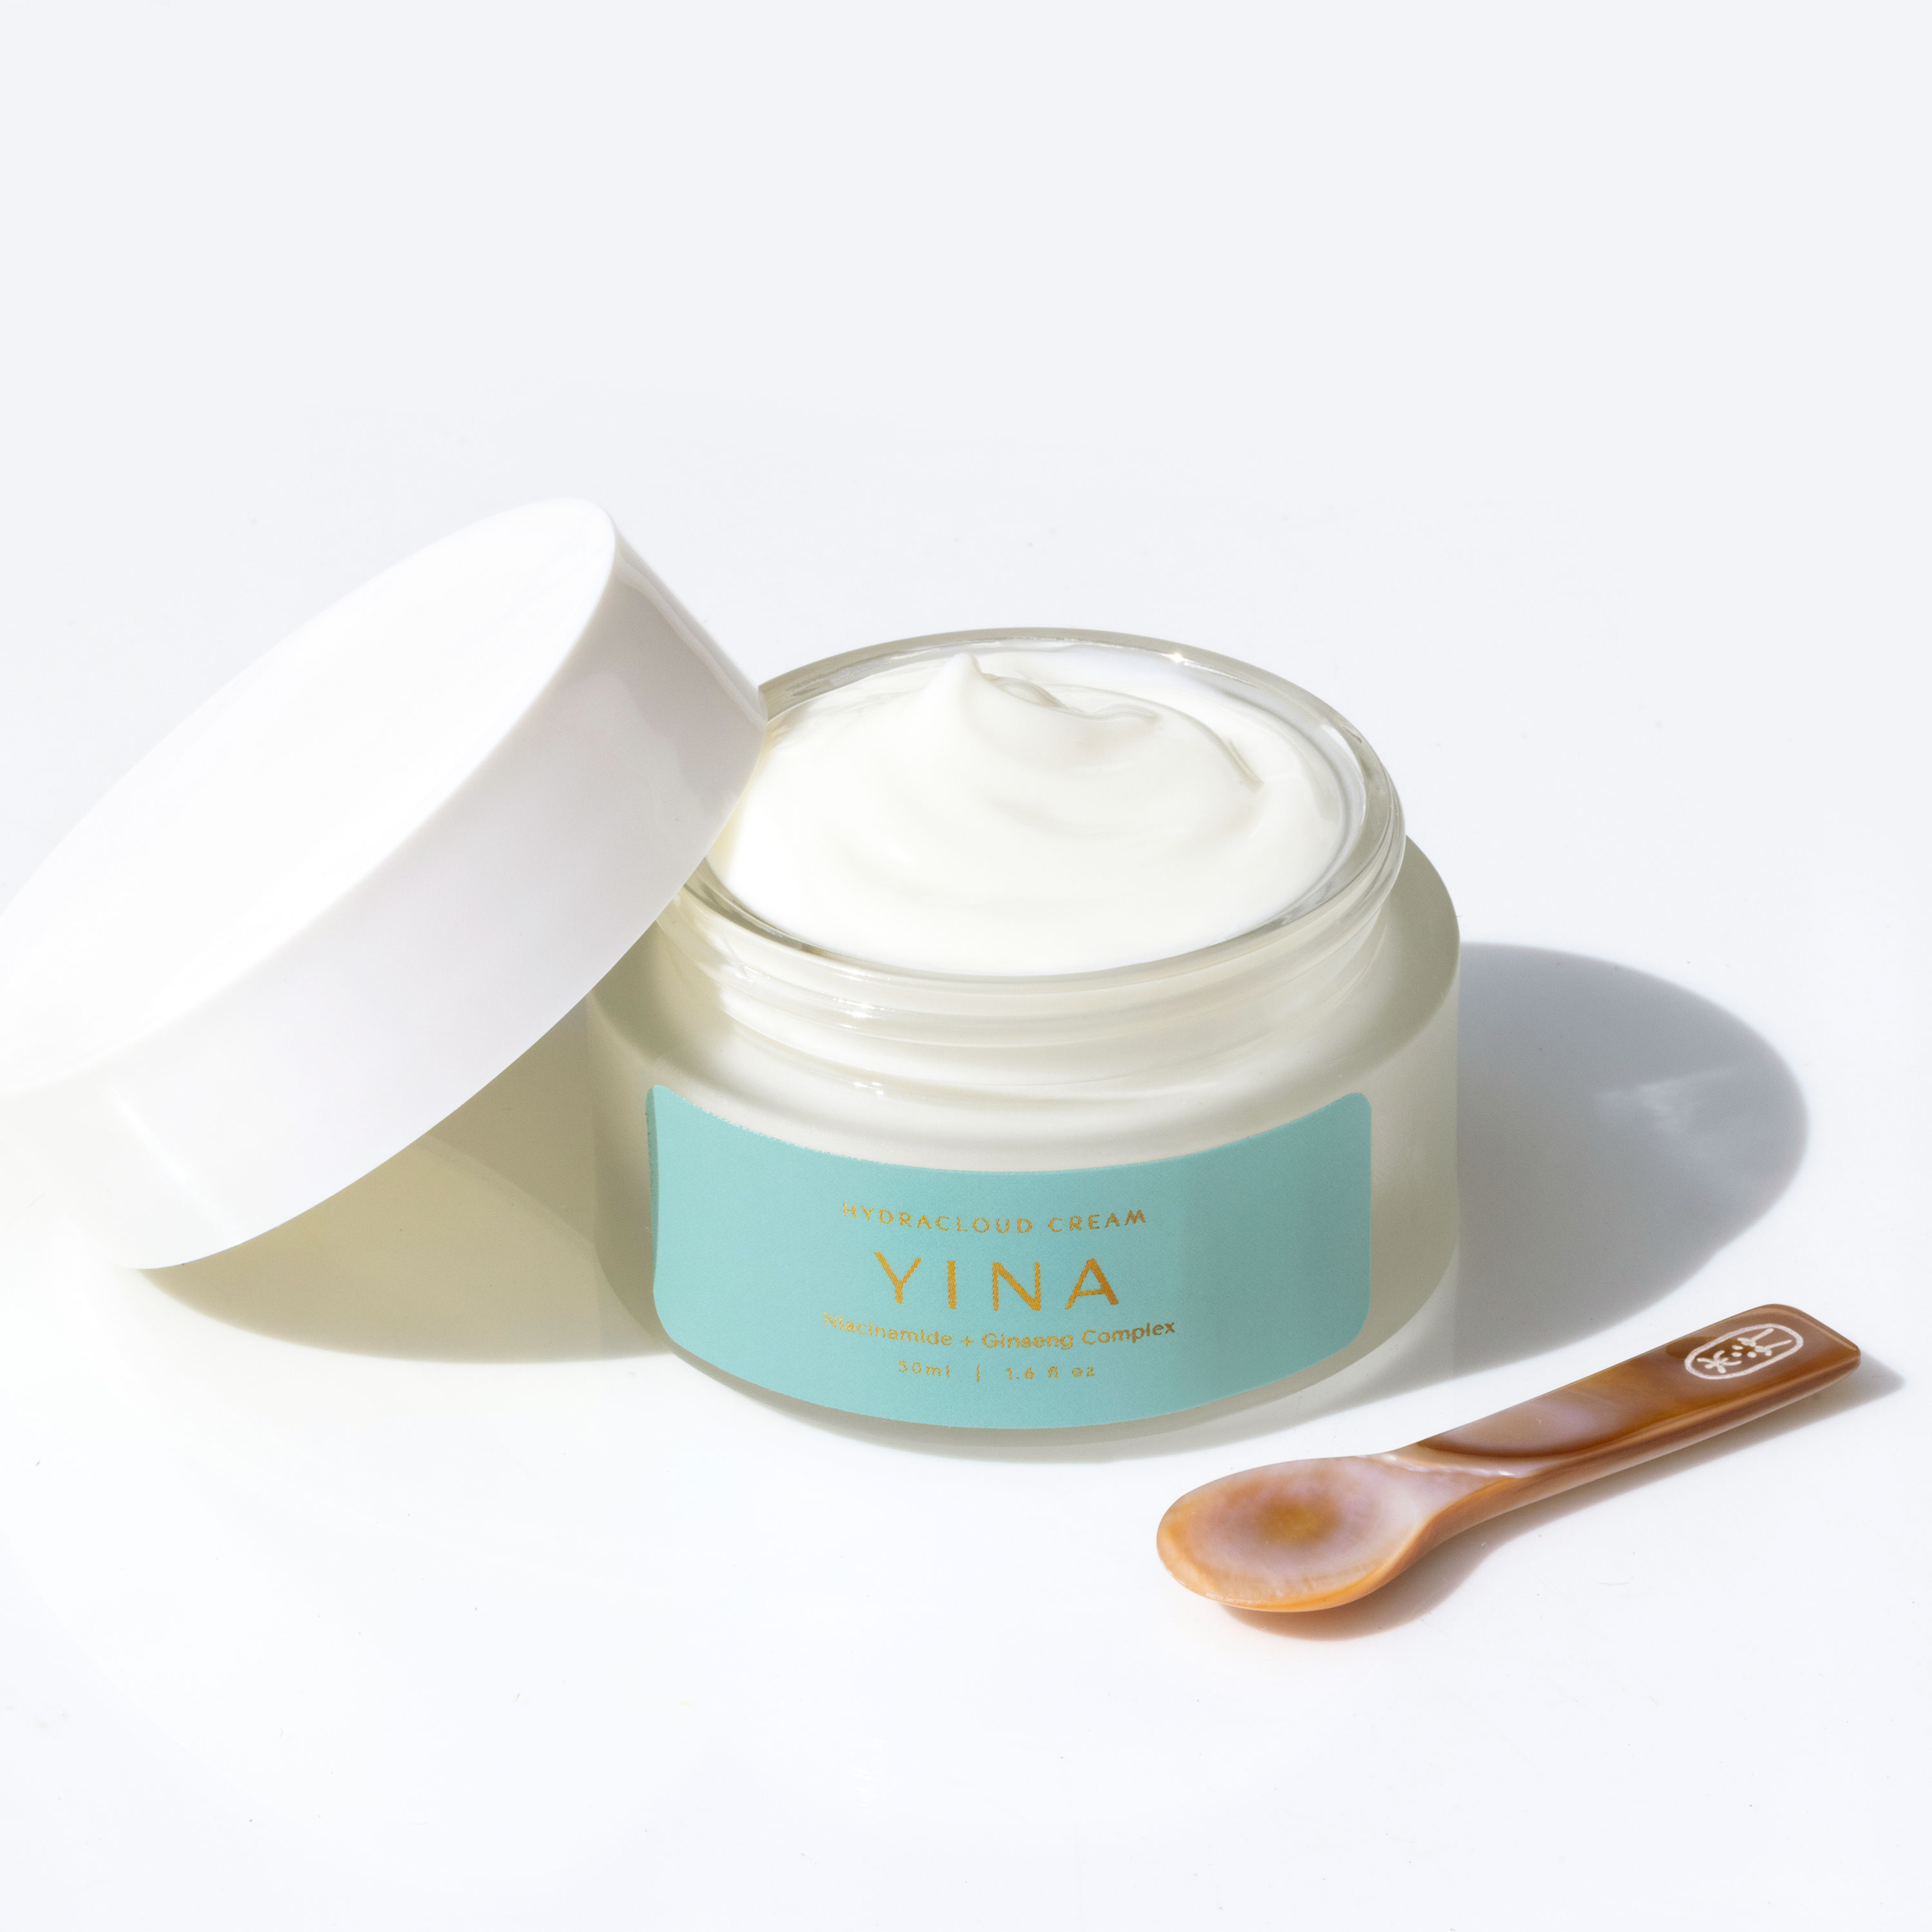 yina hydracloud cream and mother of pearl spoon